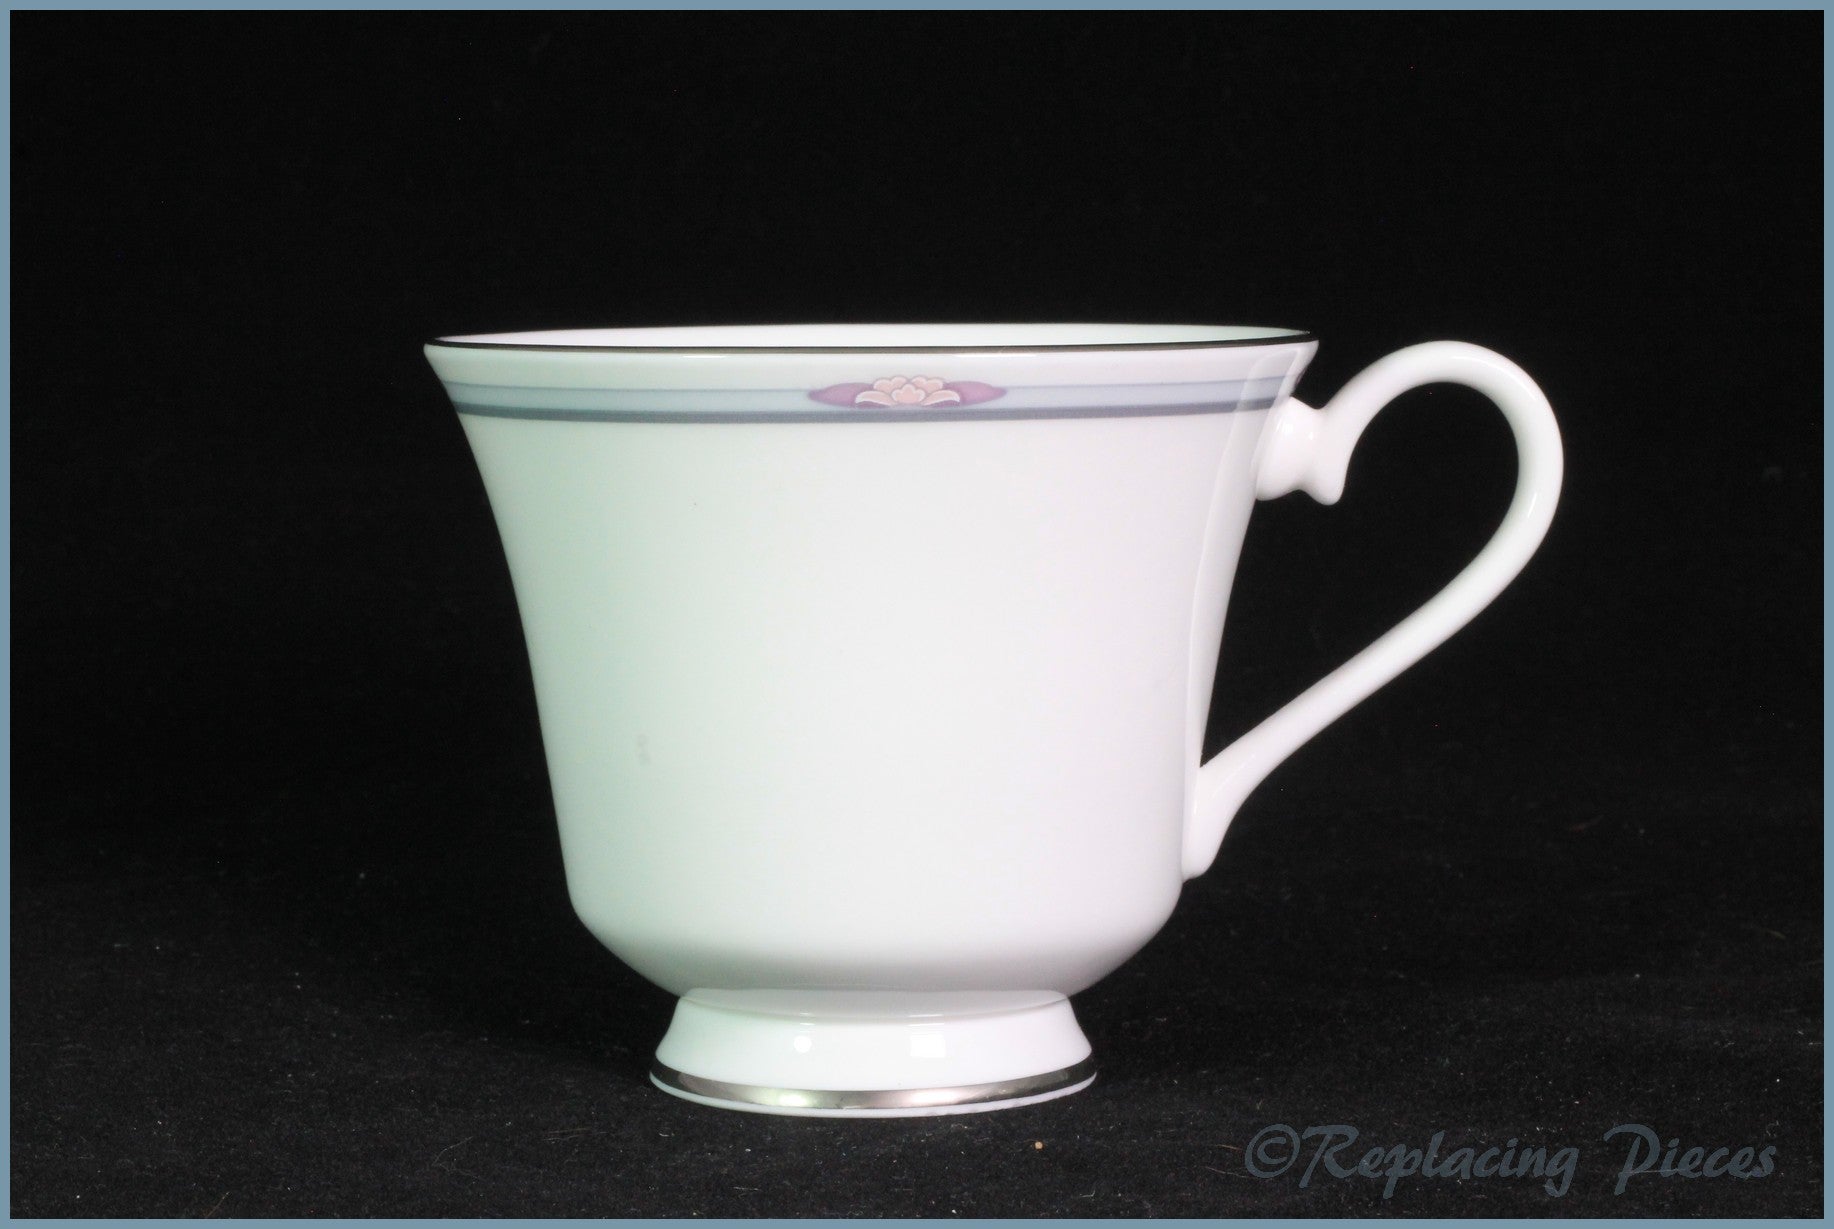 Royal Doulton - Simplicity (H5112) - Teacup (Footed)